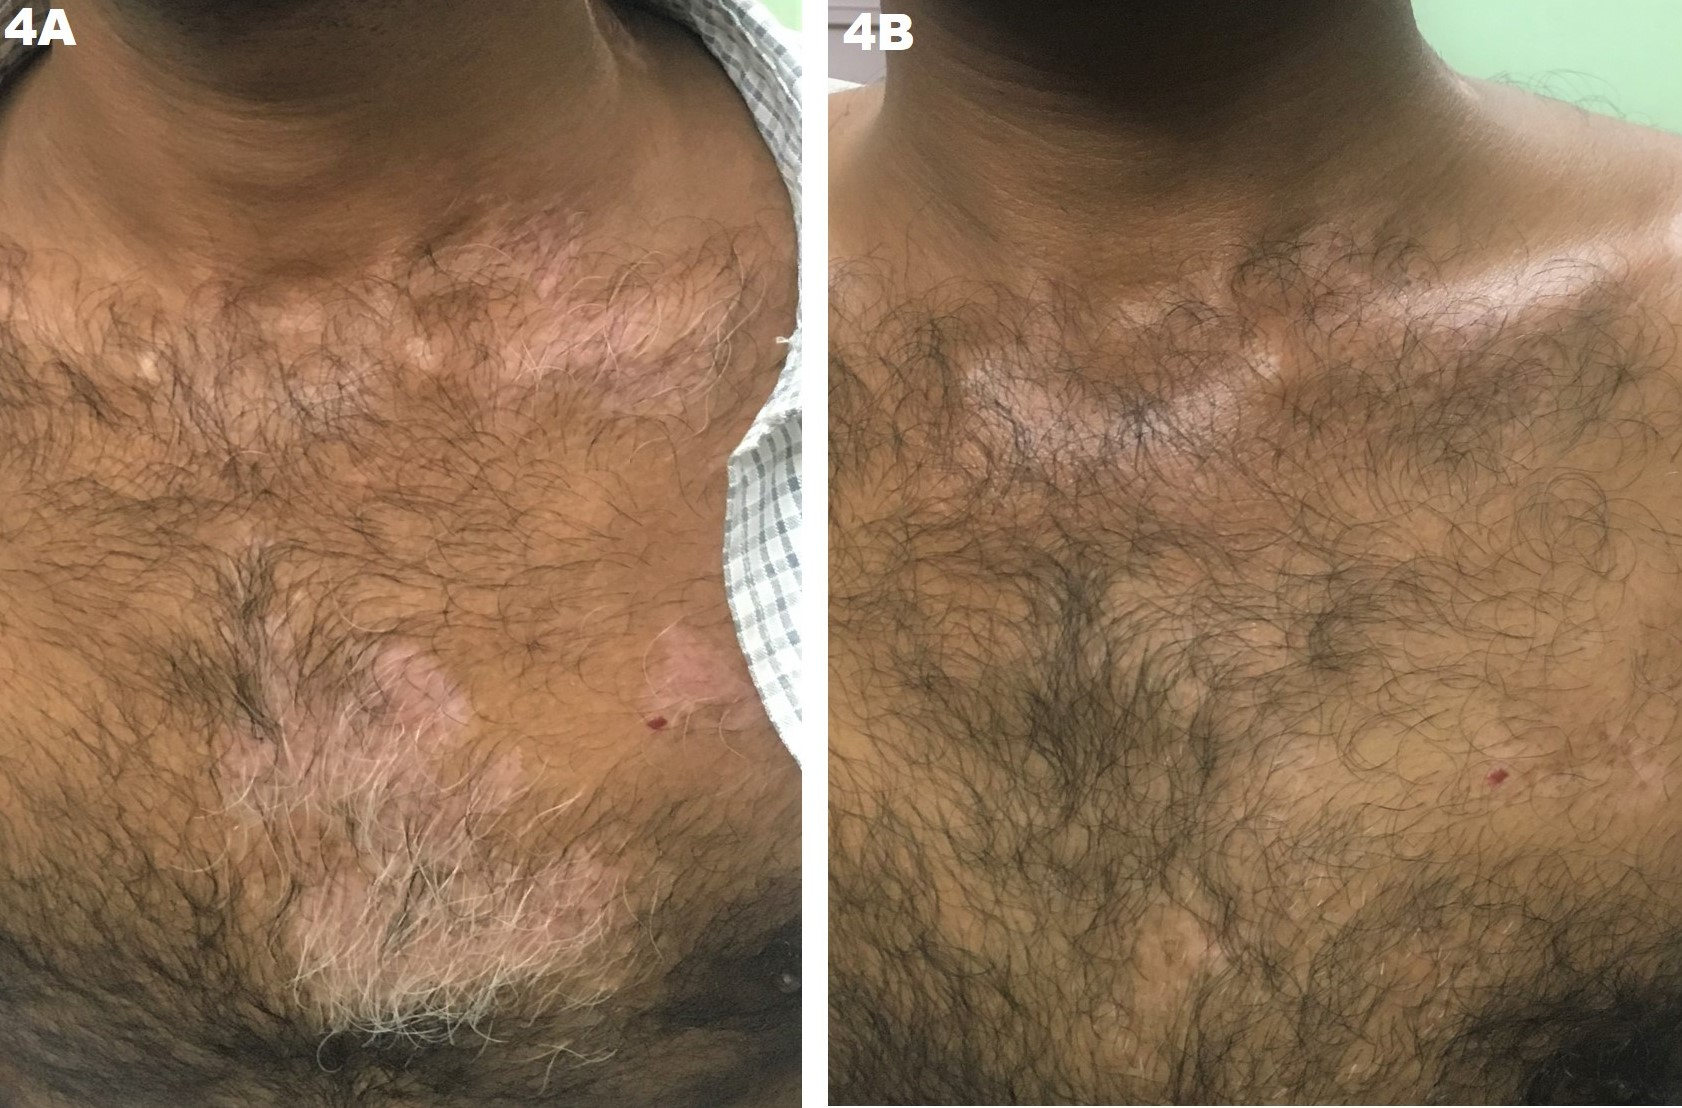 Figure 4. JODHPUR TECHNIQUE (JT) – Depiction of success of the technique in vitiligo. (A) Baseline vitiligo lesions over the chest of a middle-aged man. These lesions failed to repigment despite prolonged medical and phototherapy, possibly due to visible leucotrichia; and (B) More than 90% area with almost near-complete repigmentation and excellent color match with the normal skin, after a single session of JT and 4 weeks of NB-UVB phototherapy. Note the disappearance of leucotrichia, a good prognostic phenomenon seen rarely with any other surgical procedure for vitiligo. 